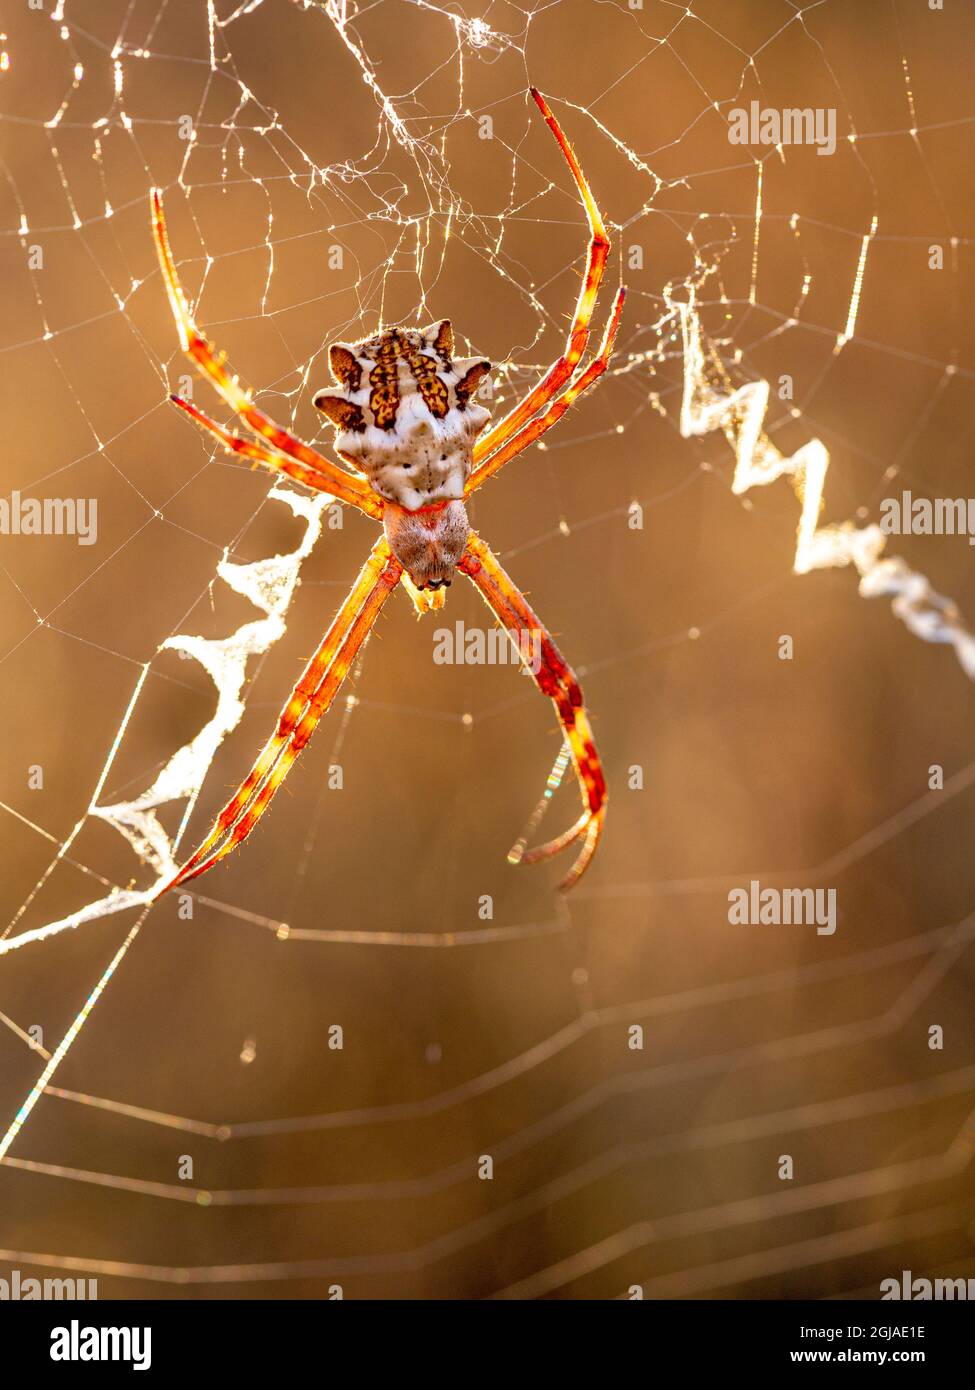 Silver garden spider (argiope, an orbweaver) on web showing stabilimenti and orb web. Stock Photo